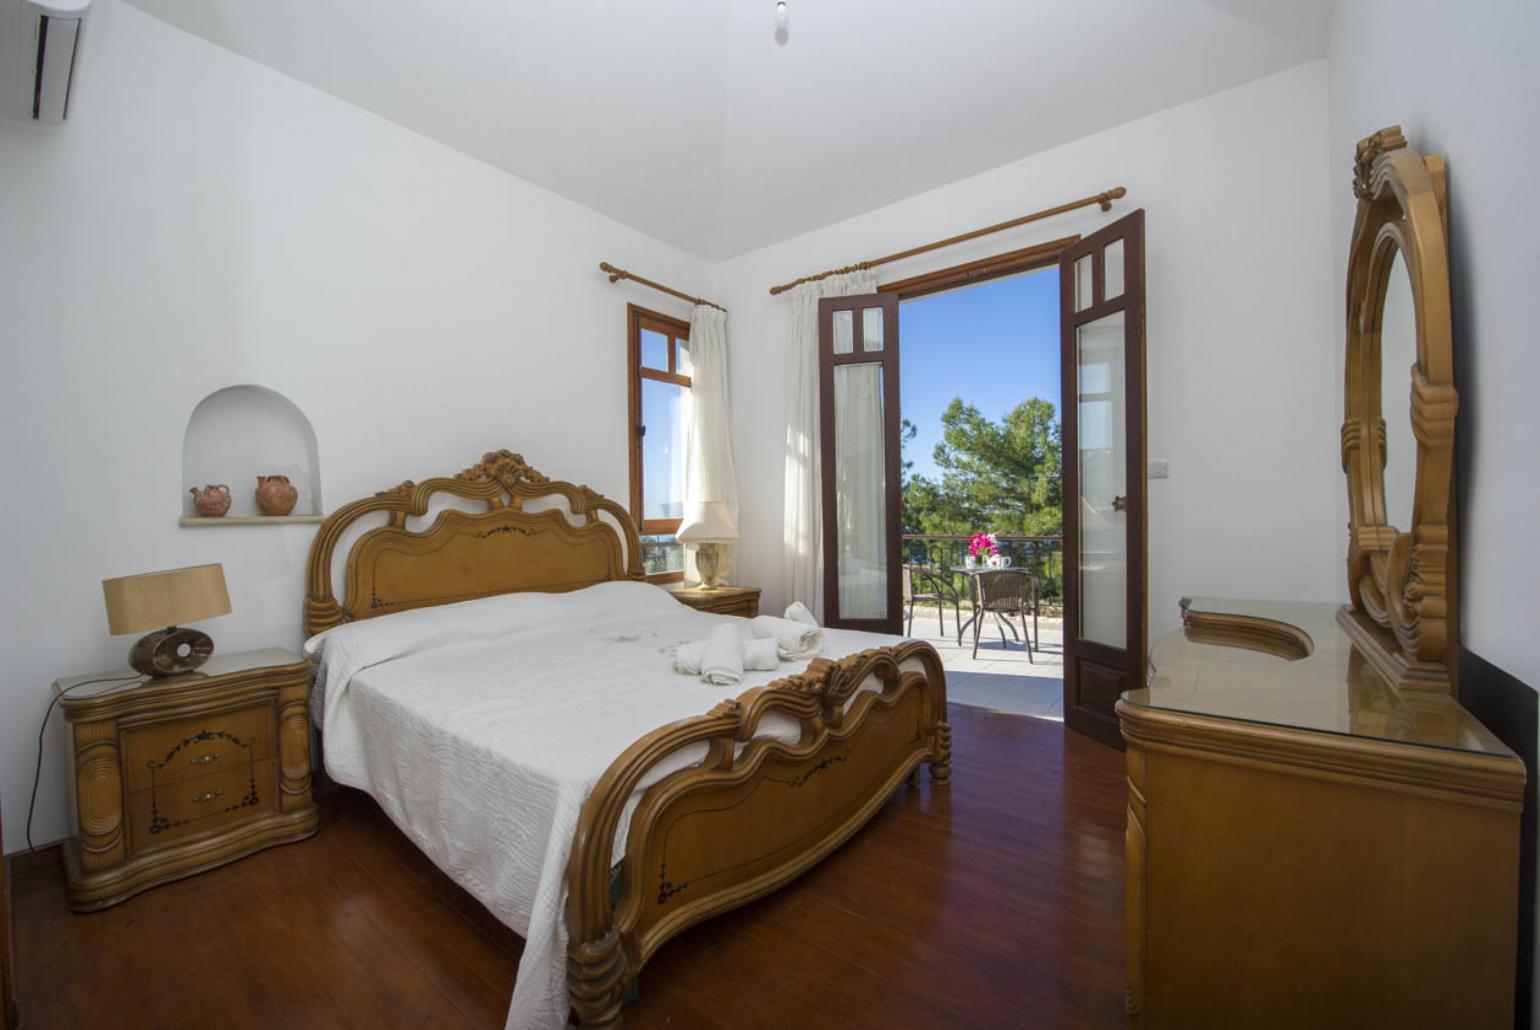 Double bedroom with A/C, en suite bathroom and terrace access